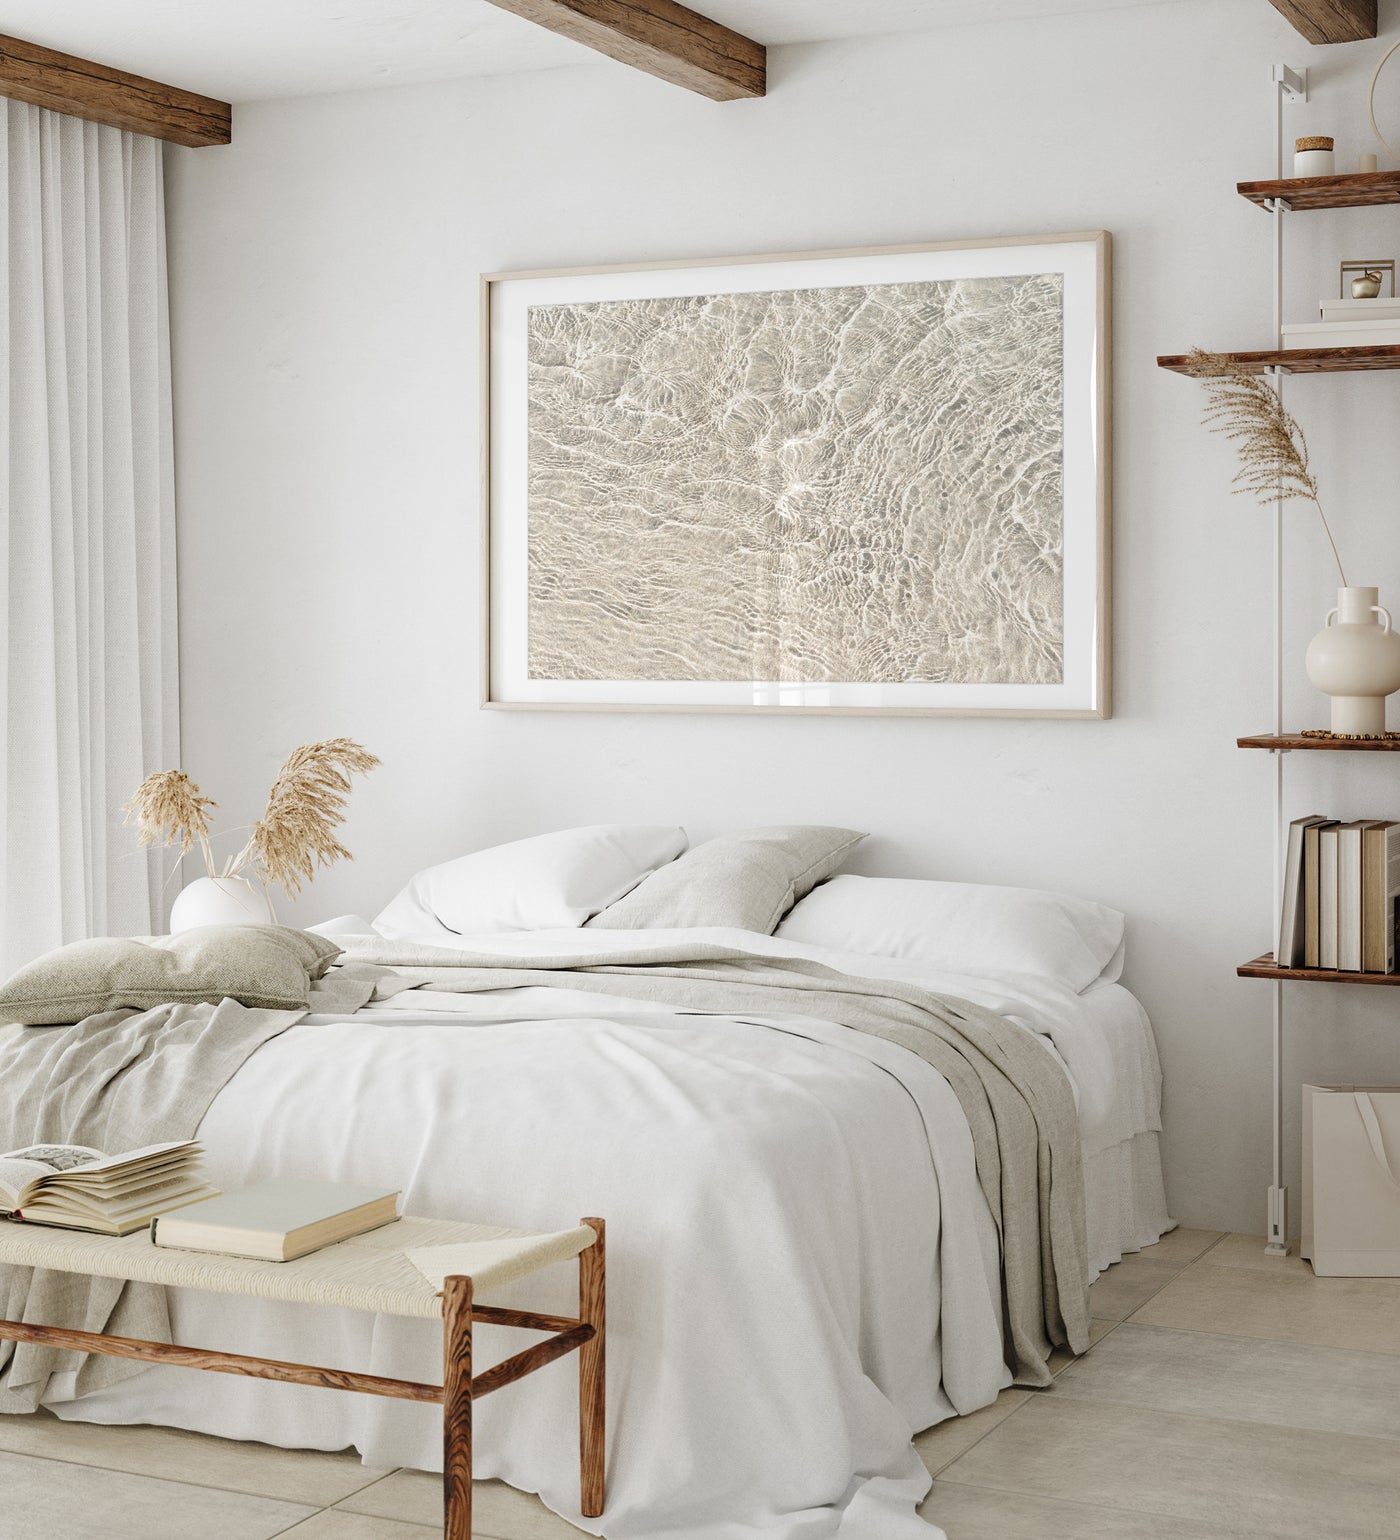 Shallow Water No 13 - Oversized neutral wall art by Cattie Coyle Photography in bedroom